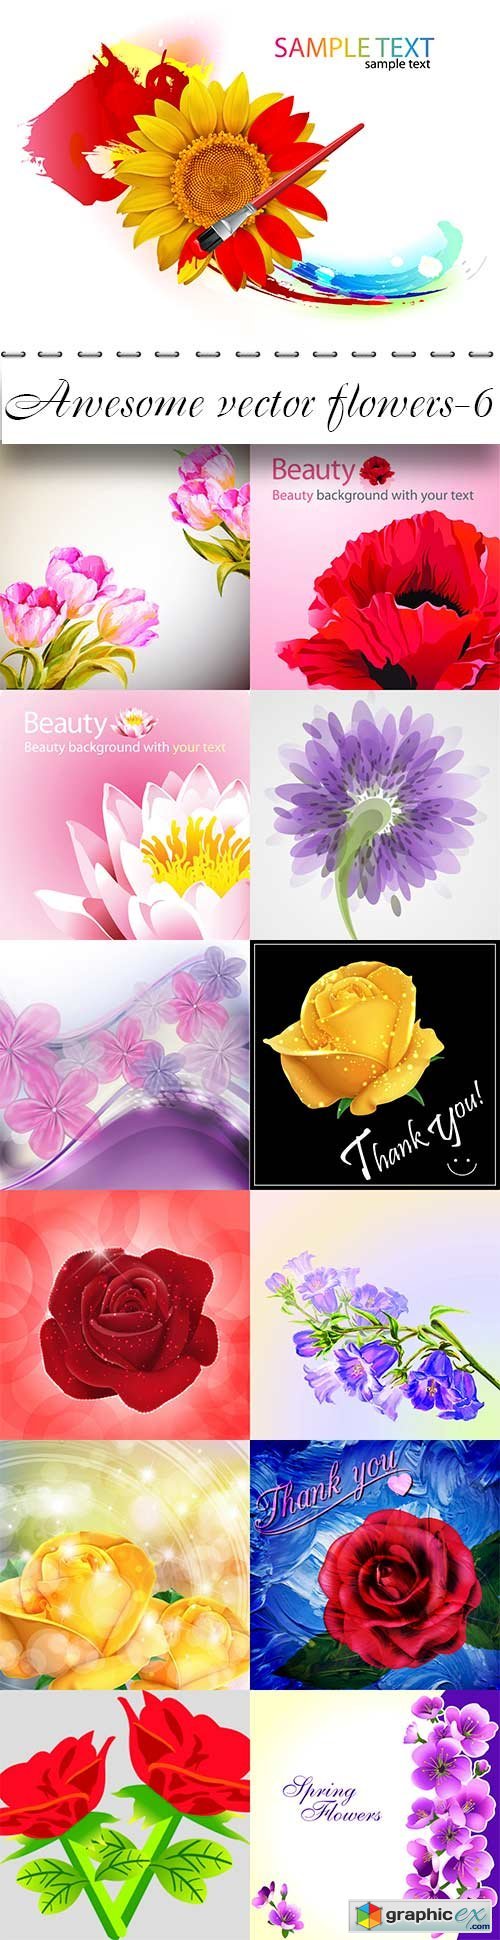 Awesome vector flowers-6